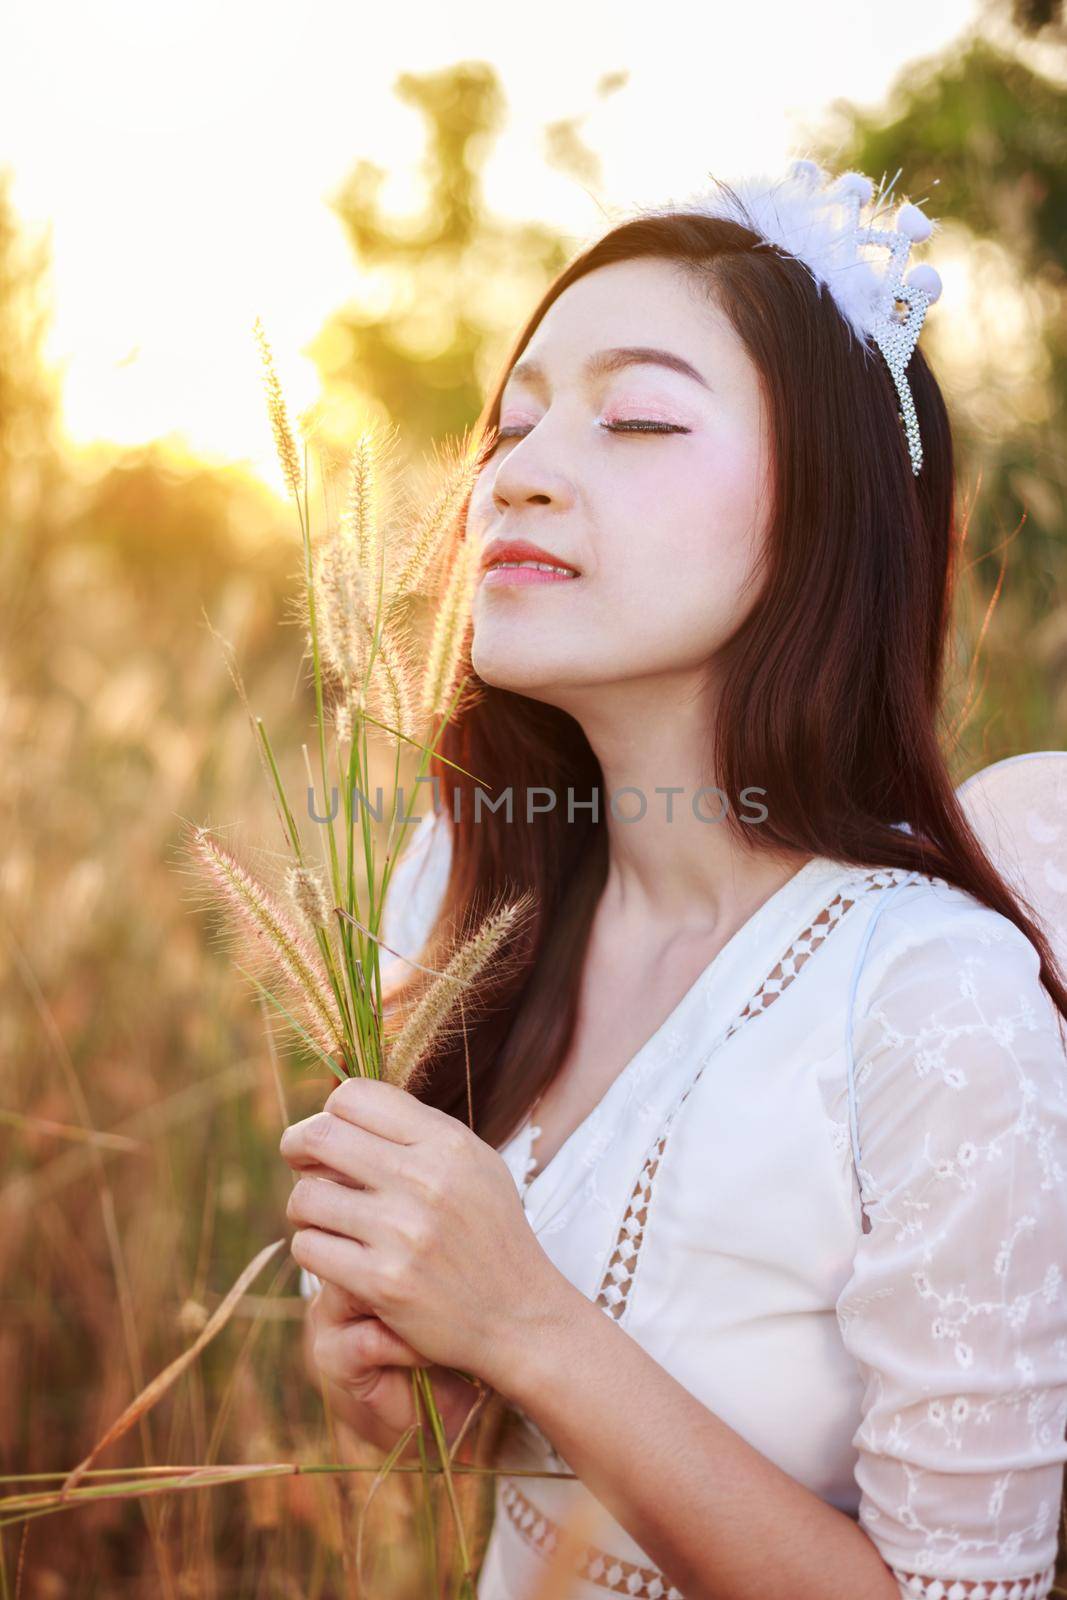 beautiful angel woman in a grass field with sunlight